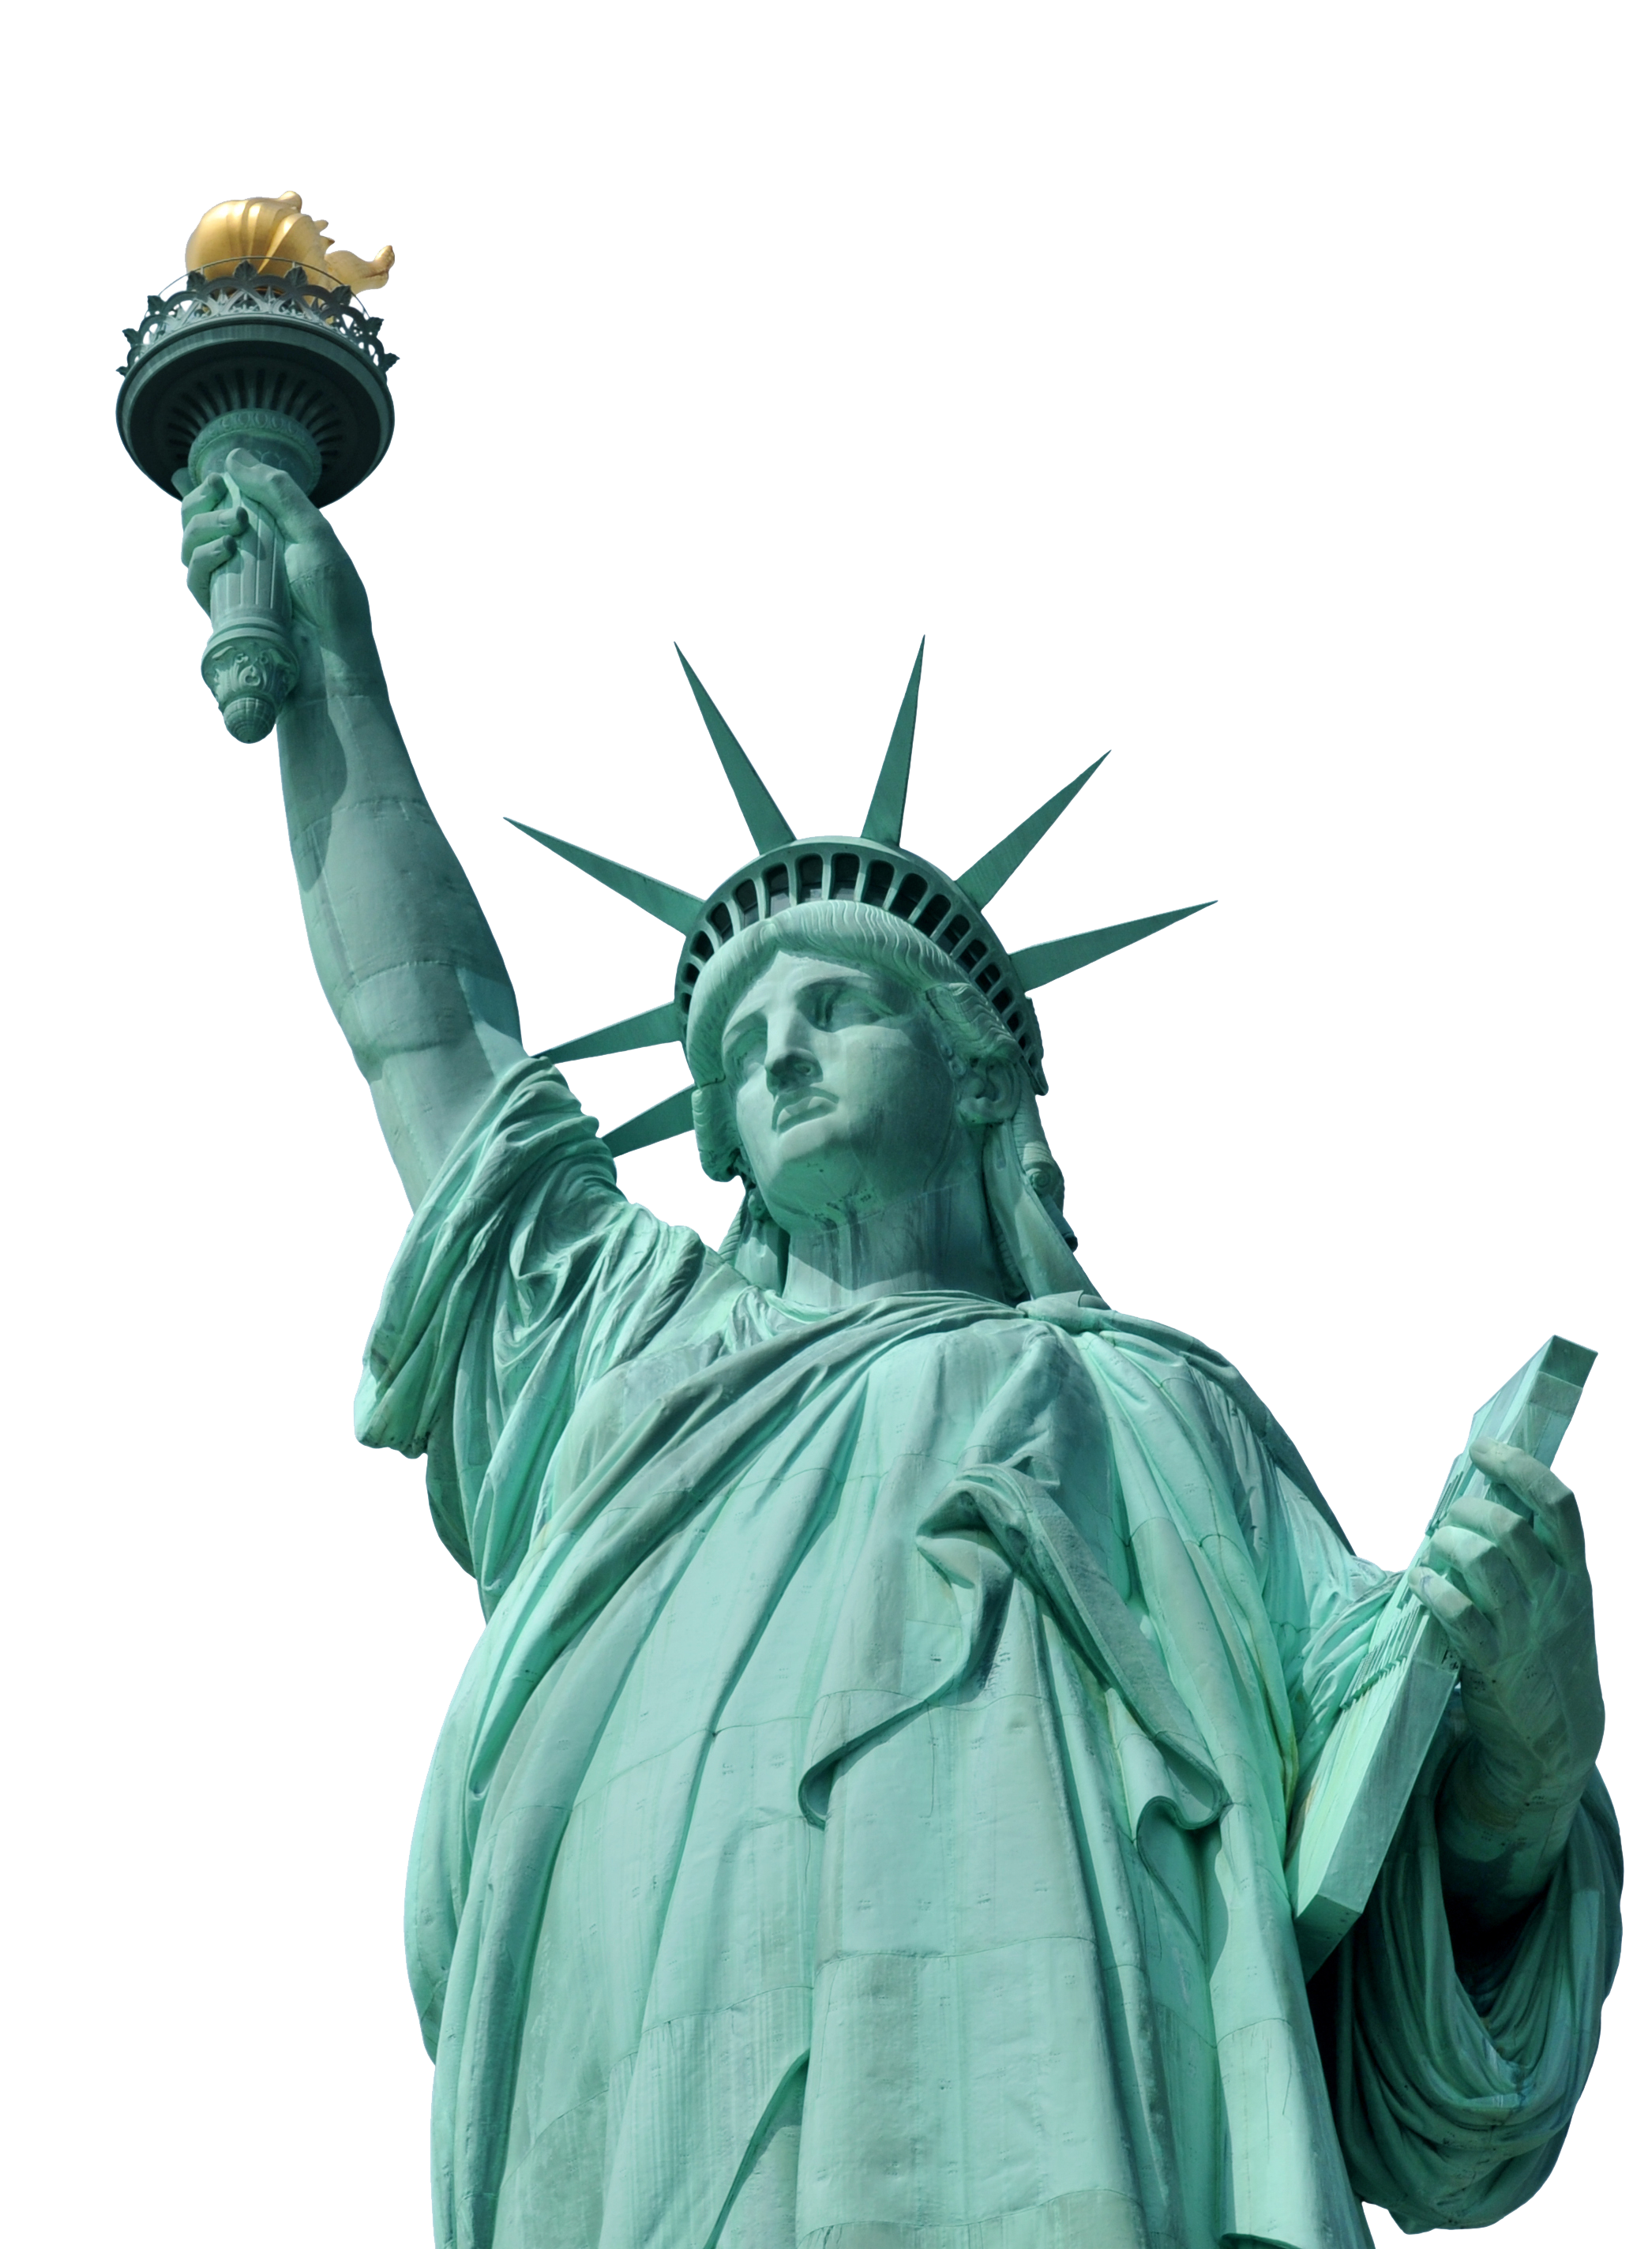 Statue of Liberty (PNG) by re